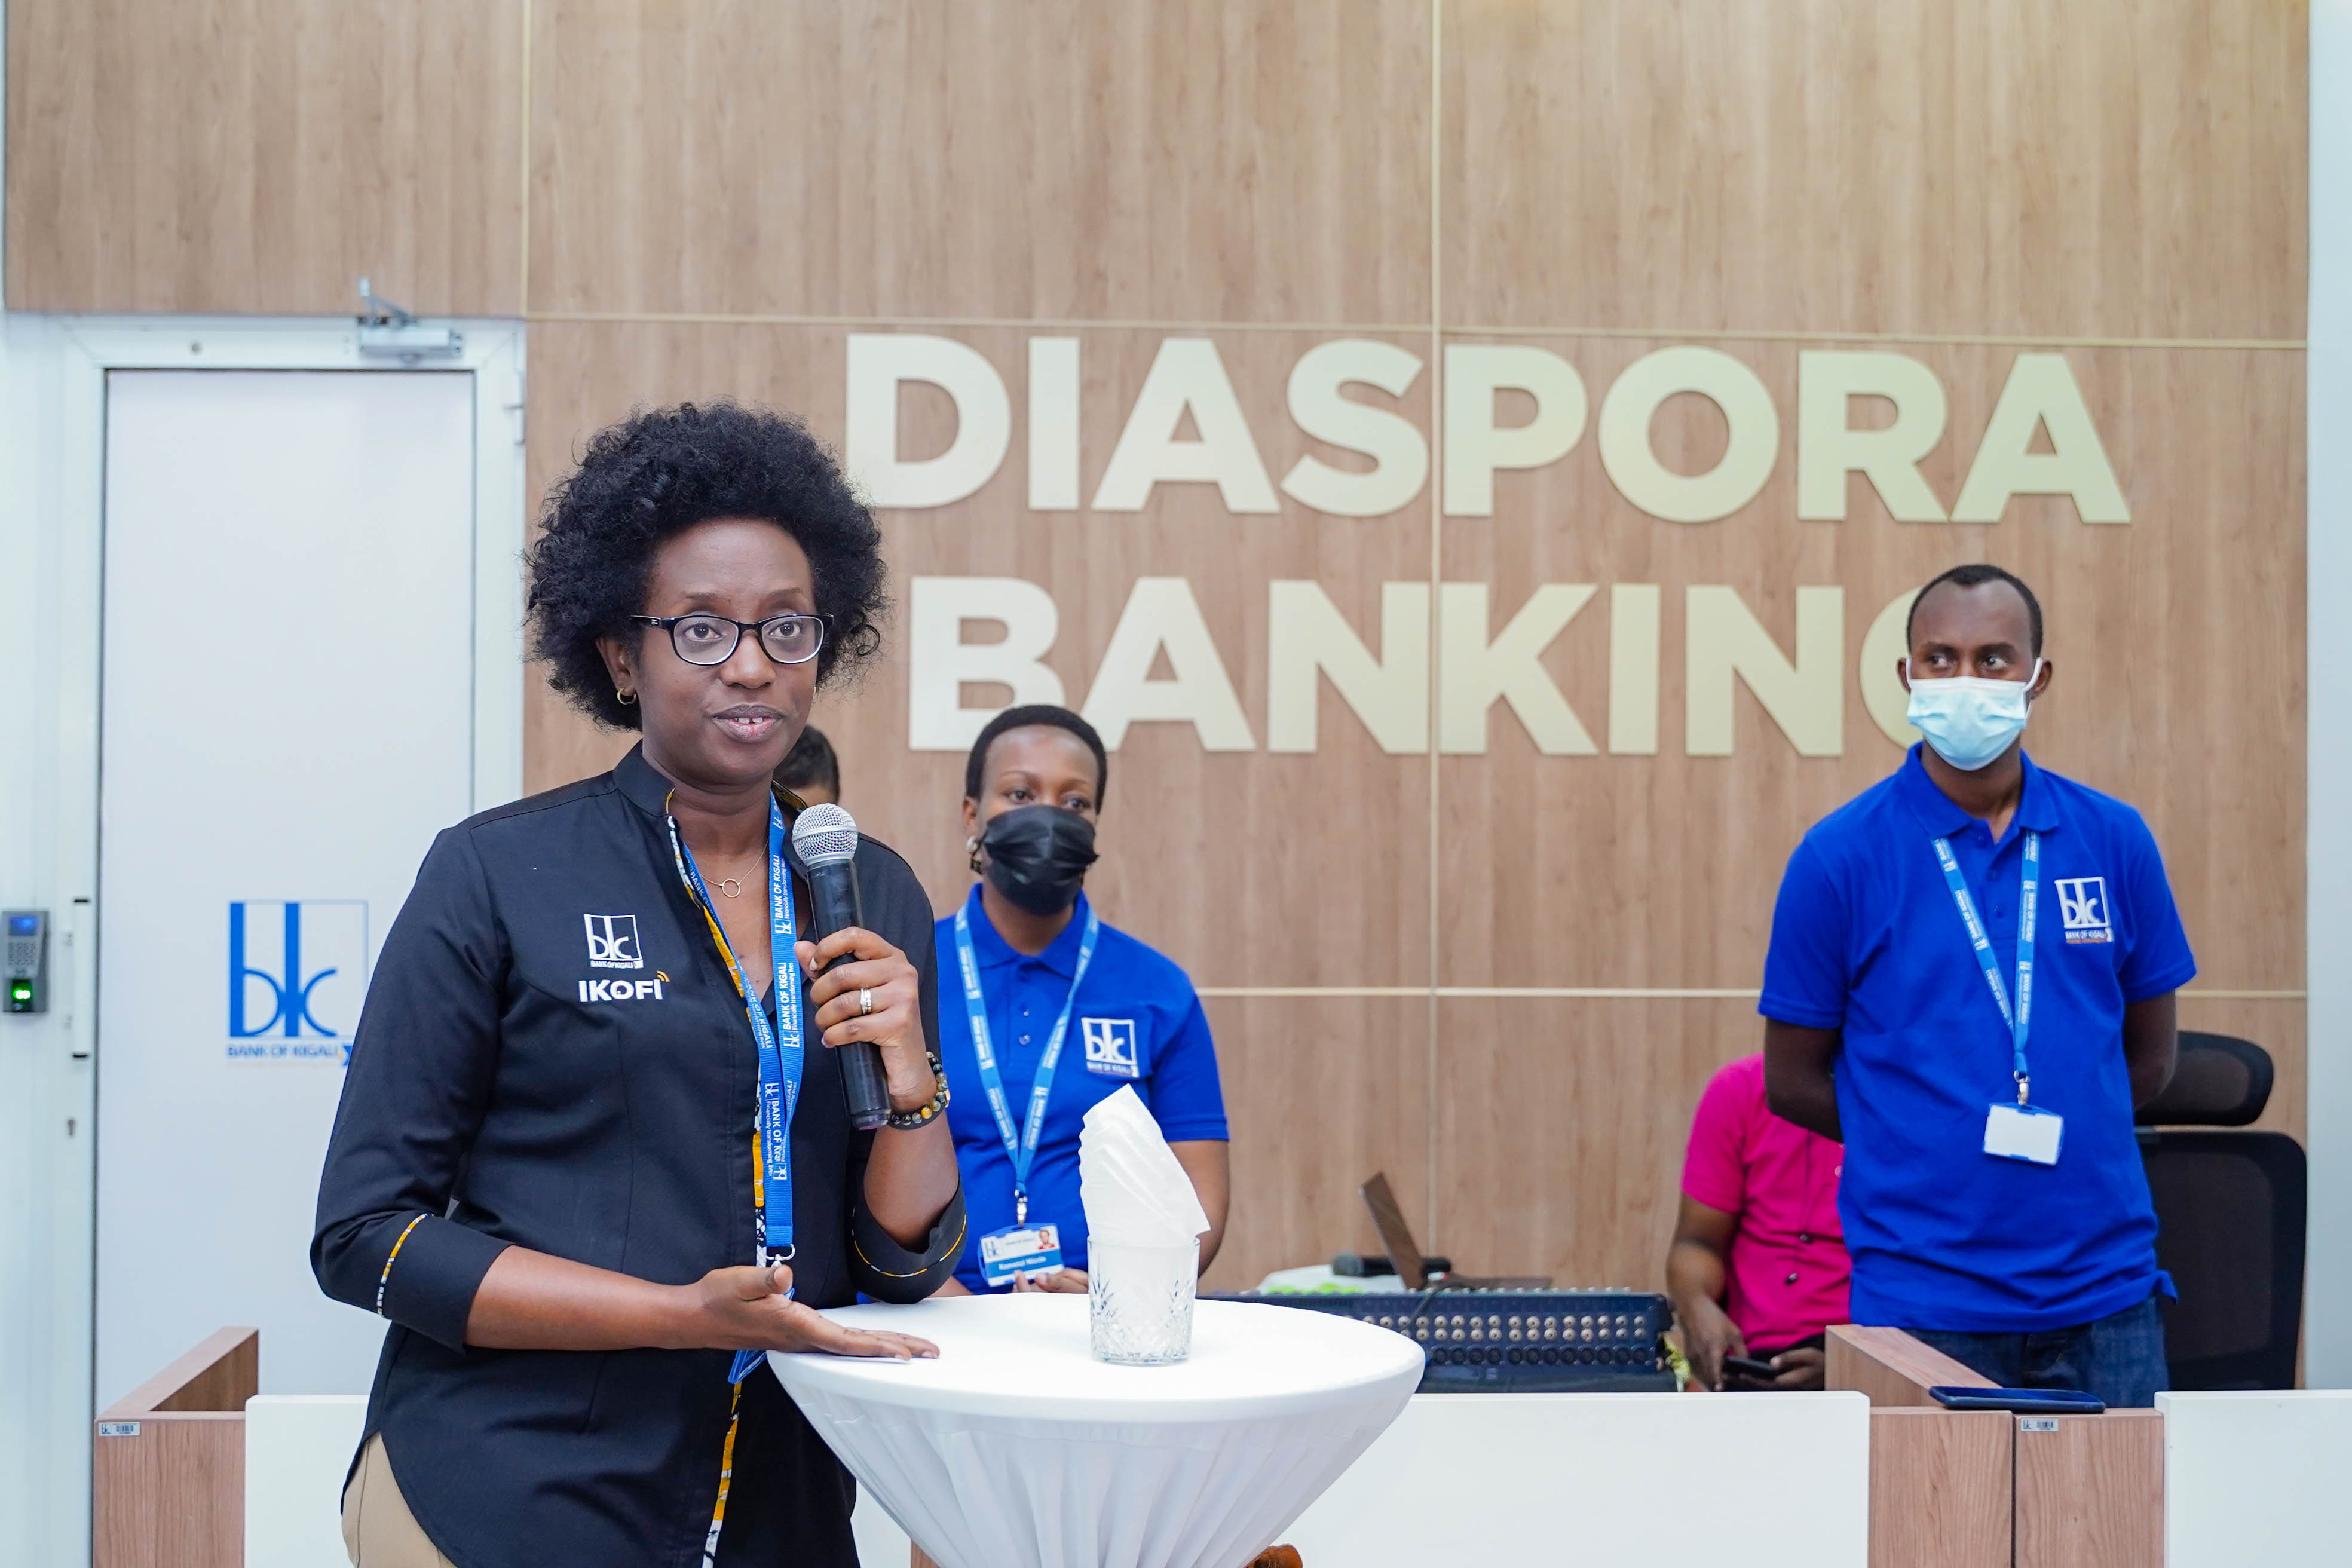 Diane Karusisi, the Chief Executive Officer of BK delivers remarks during the launching of the Mortgage Center in Kigali on March 4, 2022. Dan Nsengiyumva